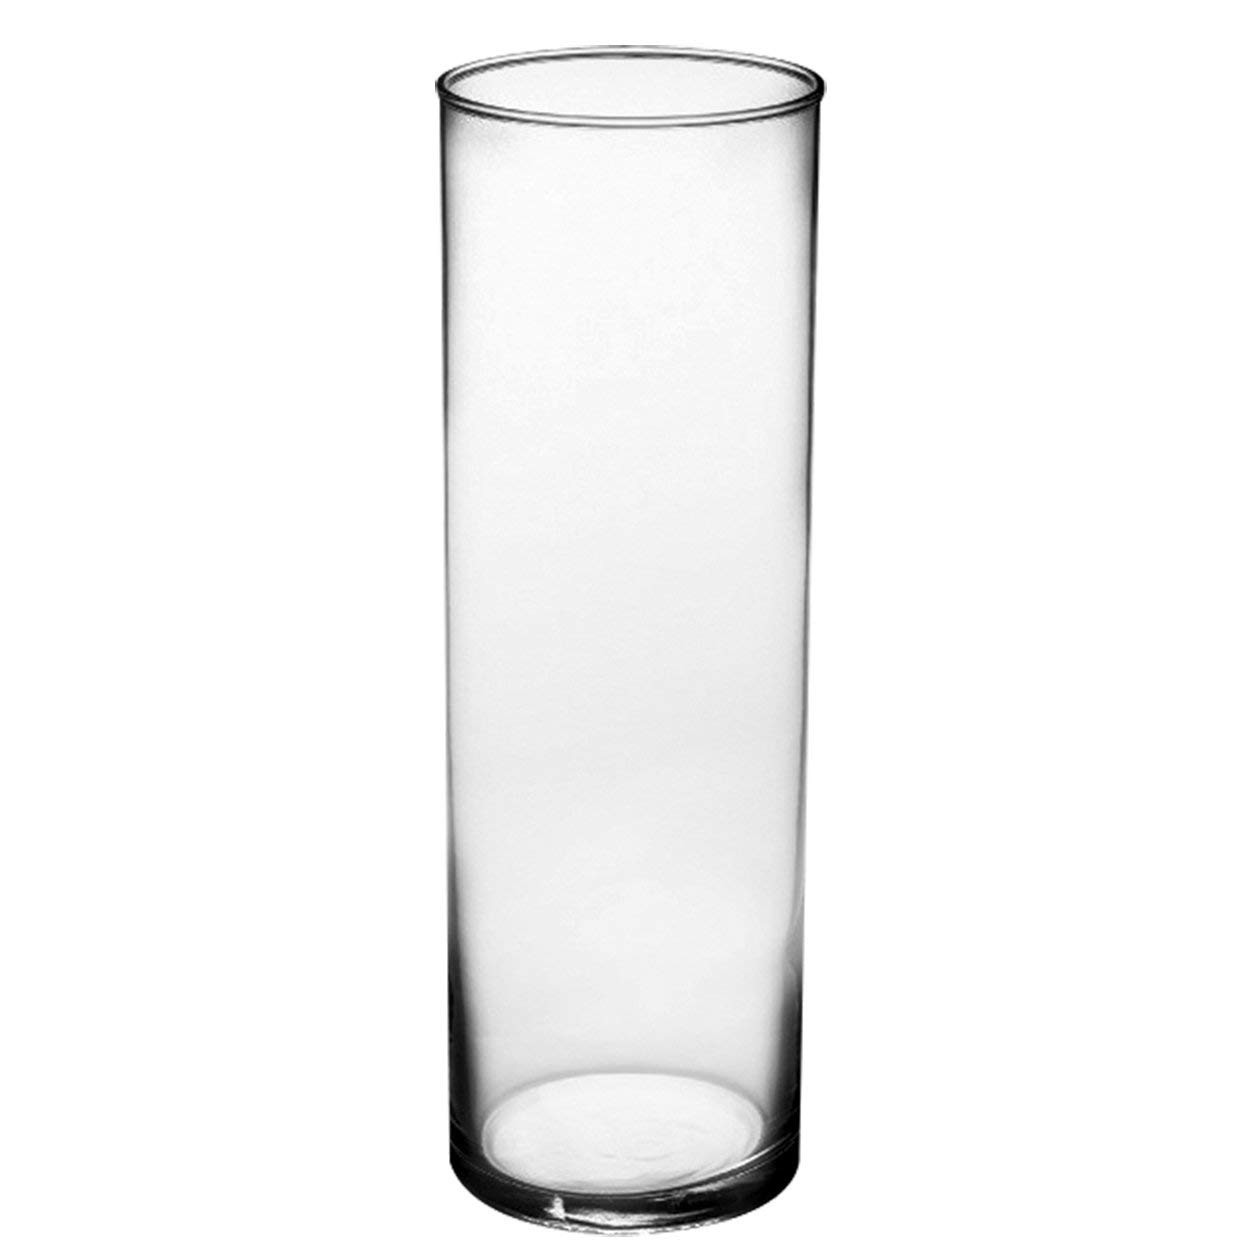 18 Cute 24 X 4 Glass Cylinder Vase 2024 free download 24 x 4 glass cylinder vase of amazon com syndicate sales 3 1 2 x 10 1 2 cylinder vase clear with regard to amazon com syndicate sales 3 1 2 x 10 1 2 cylinder vase clear planters garden outdo